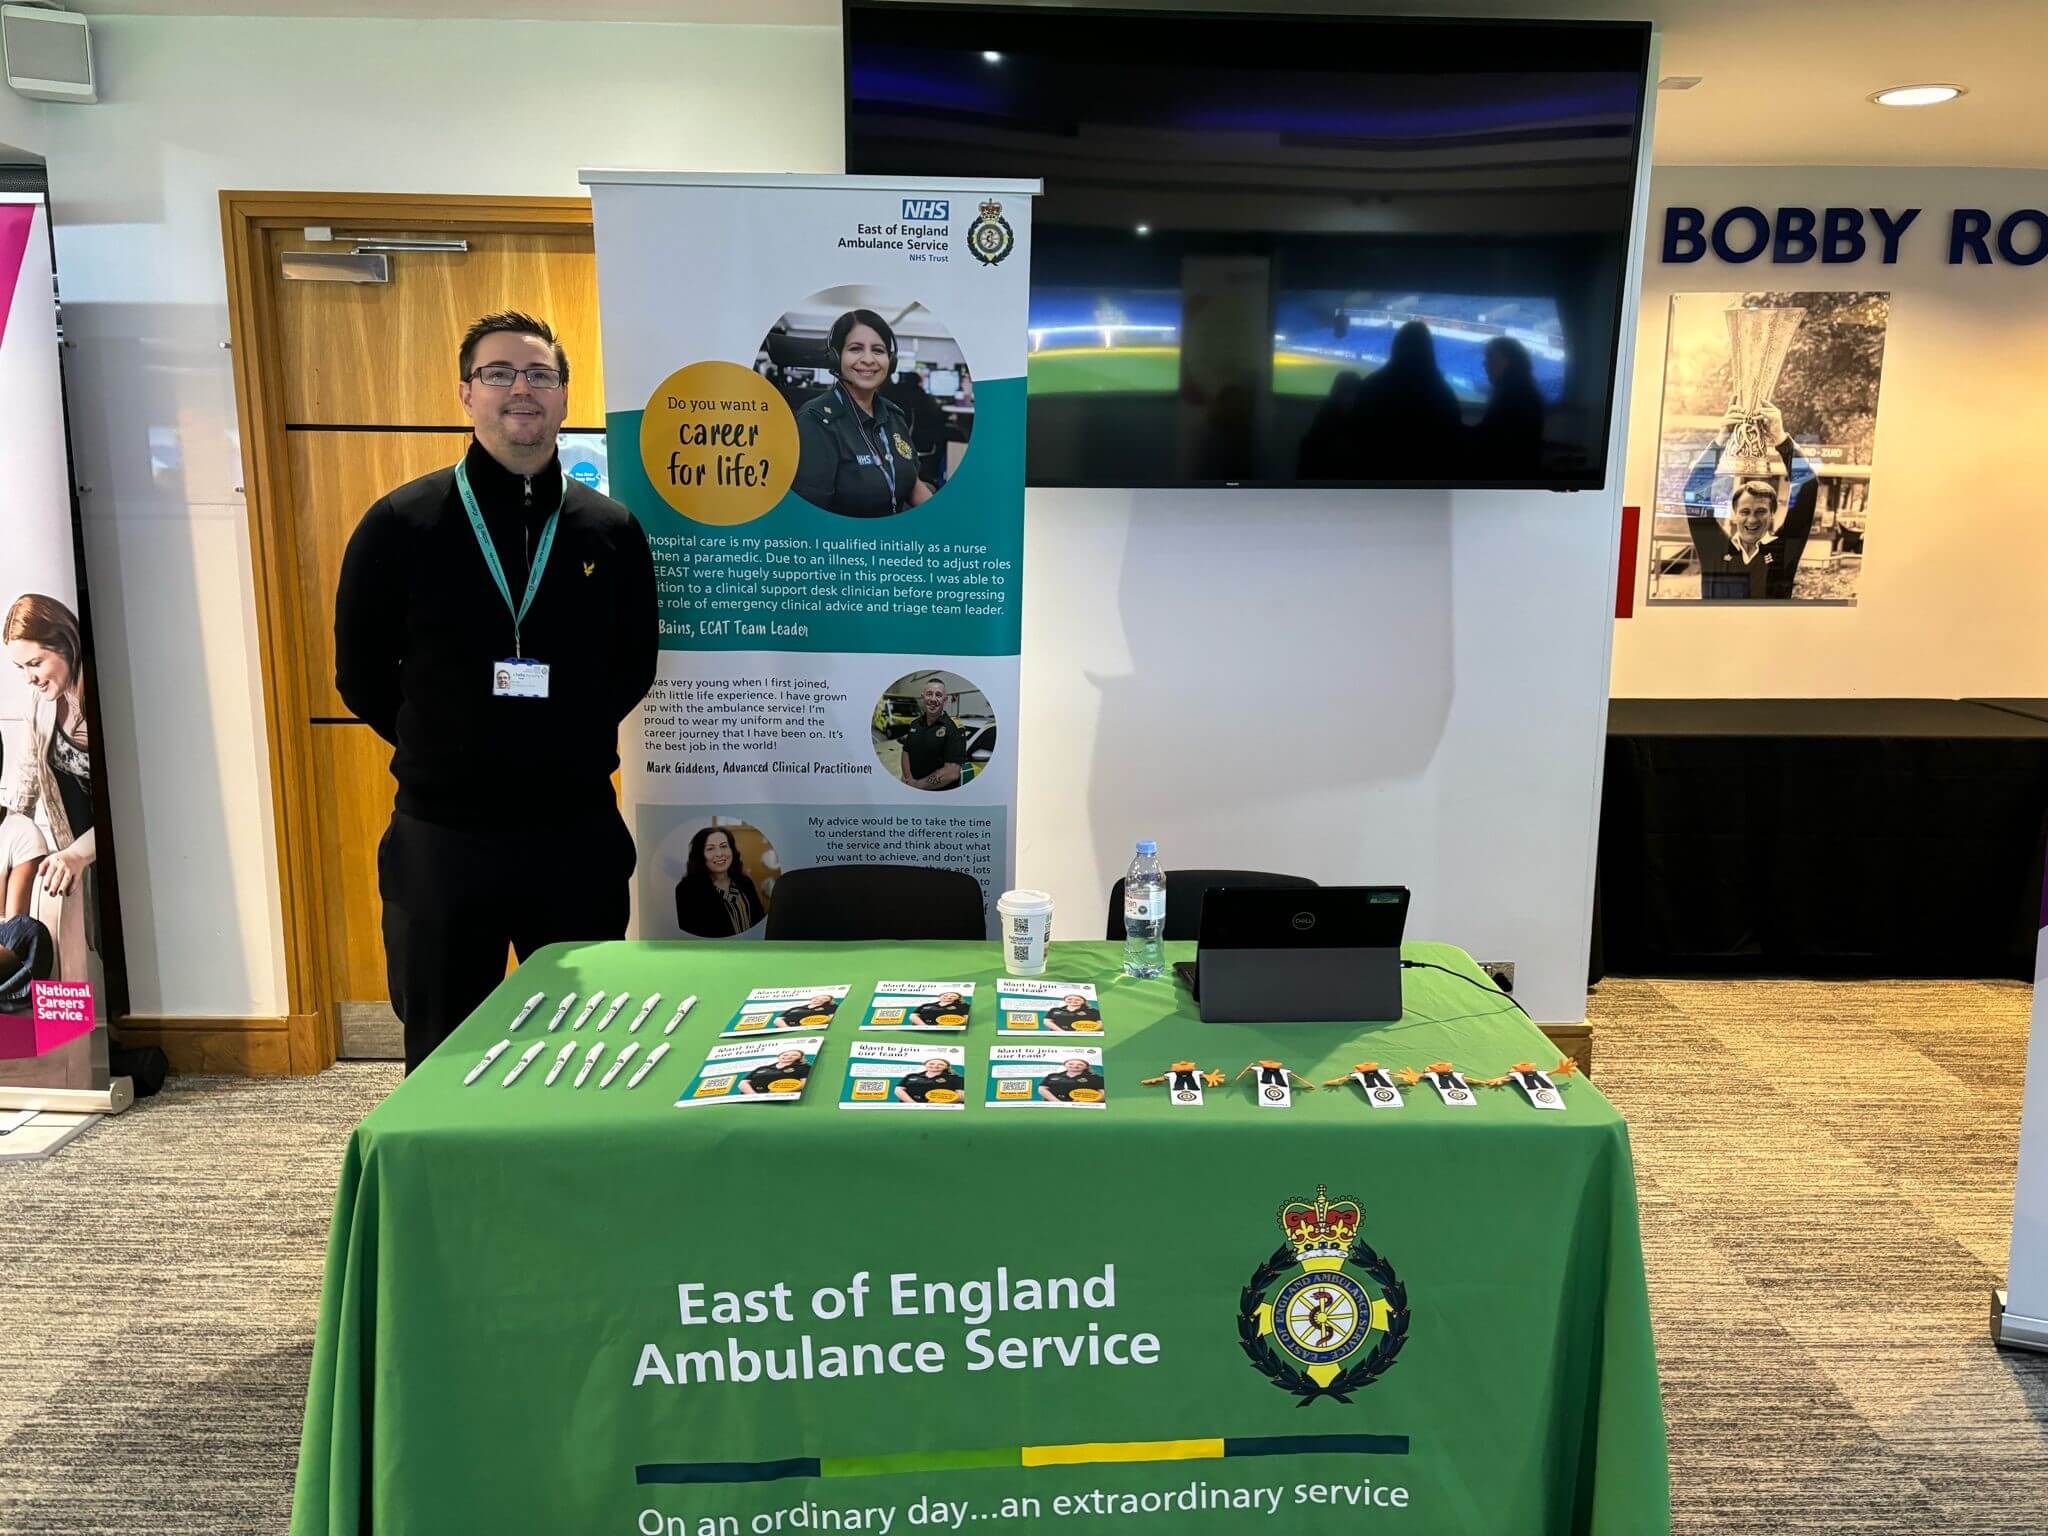 East of England Ambulance Service at our event in Ipswich